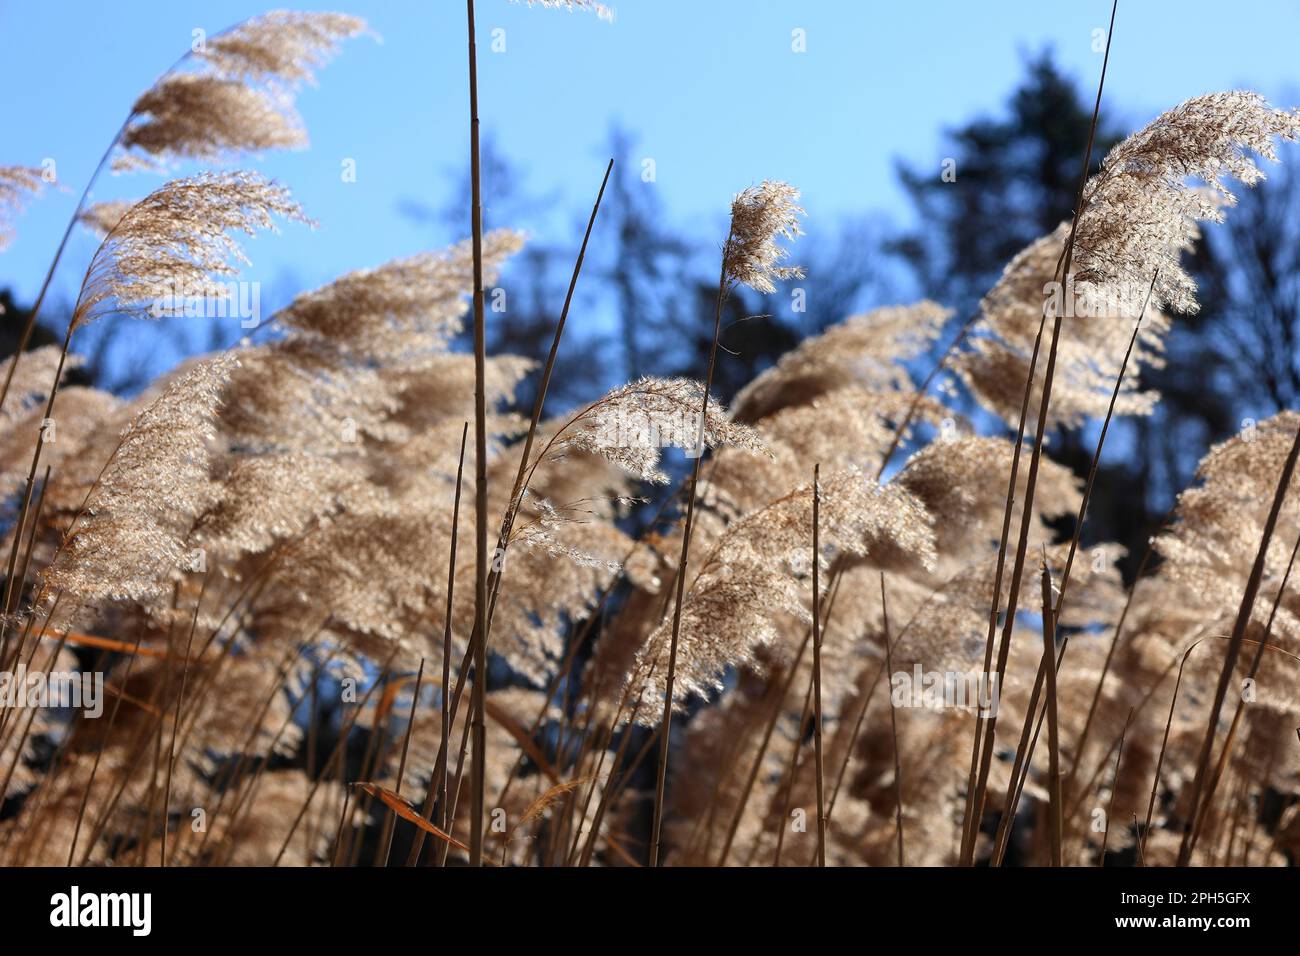 Reed plants at the Hamberger See in the Stromberg area near Vaihingen Stock Photo